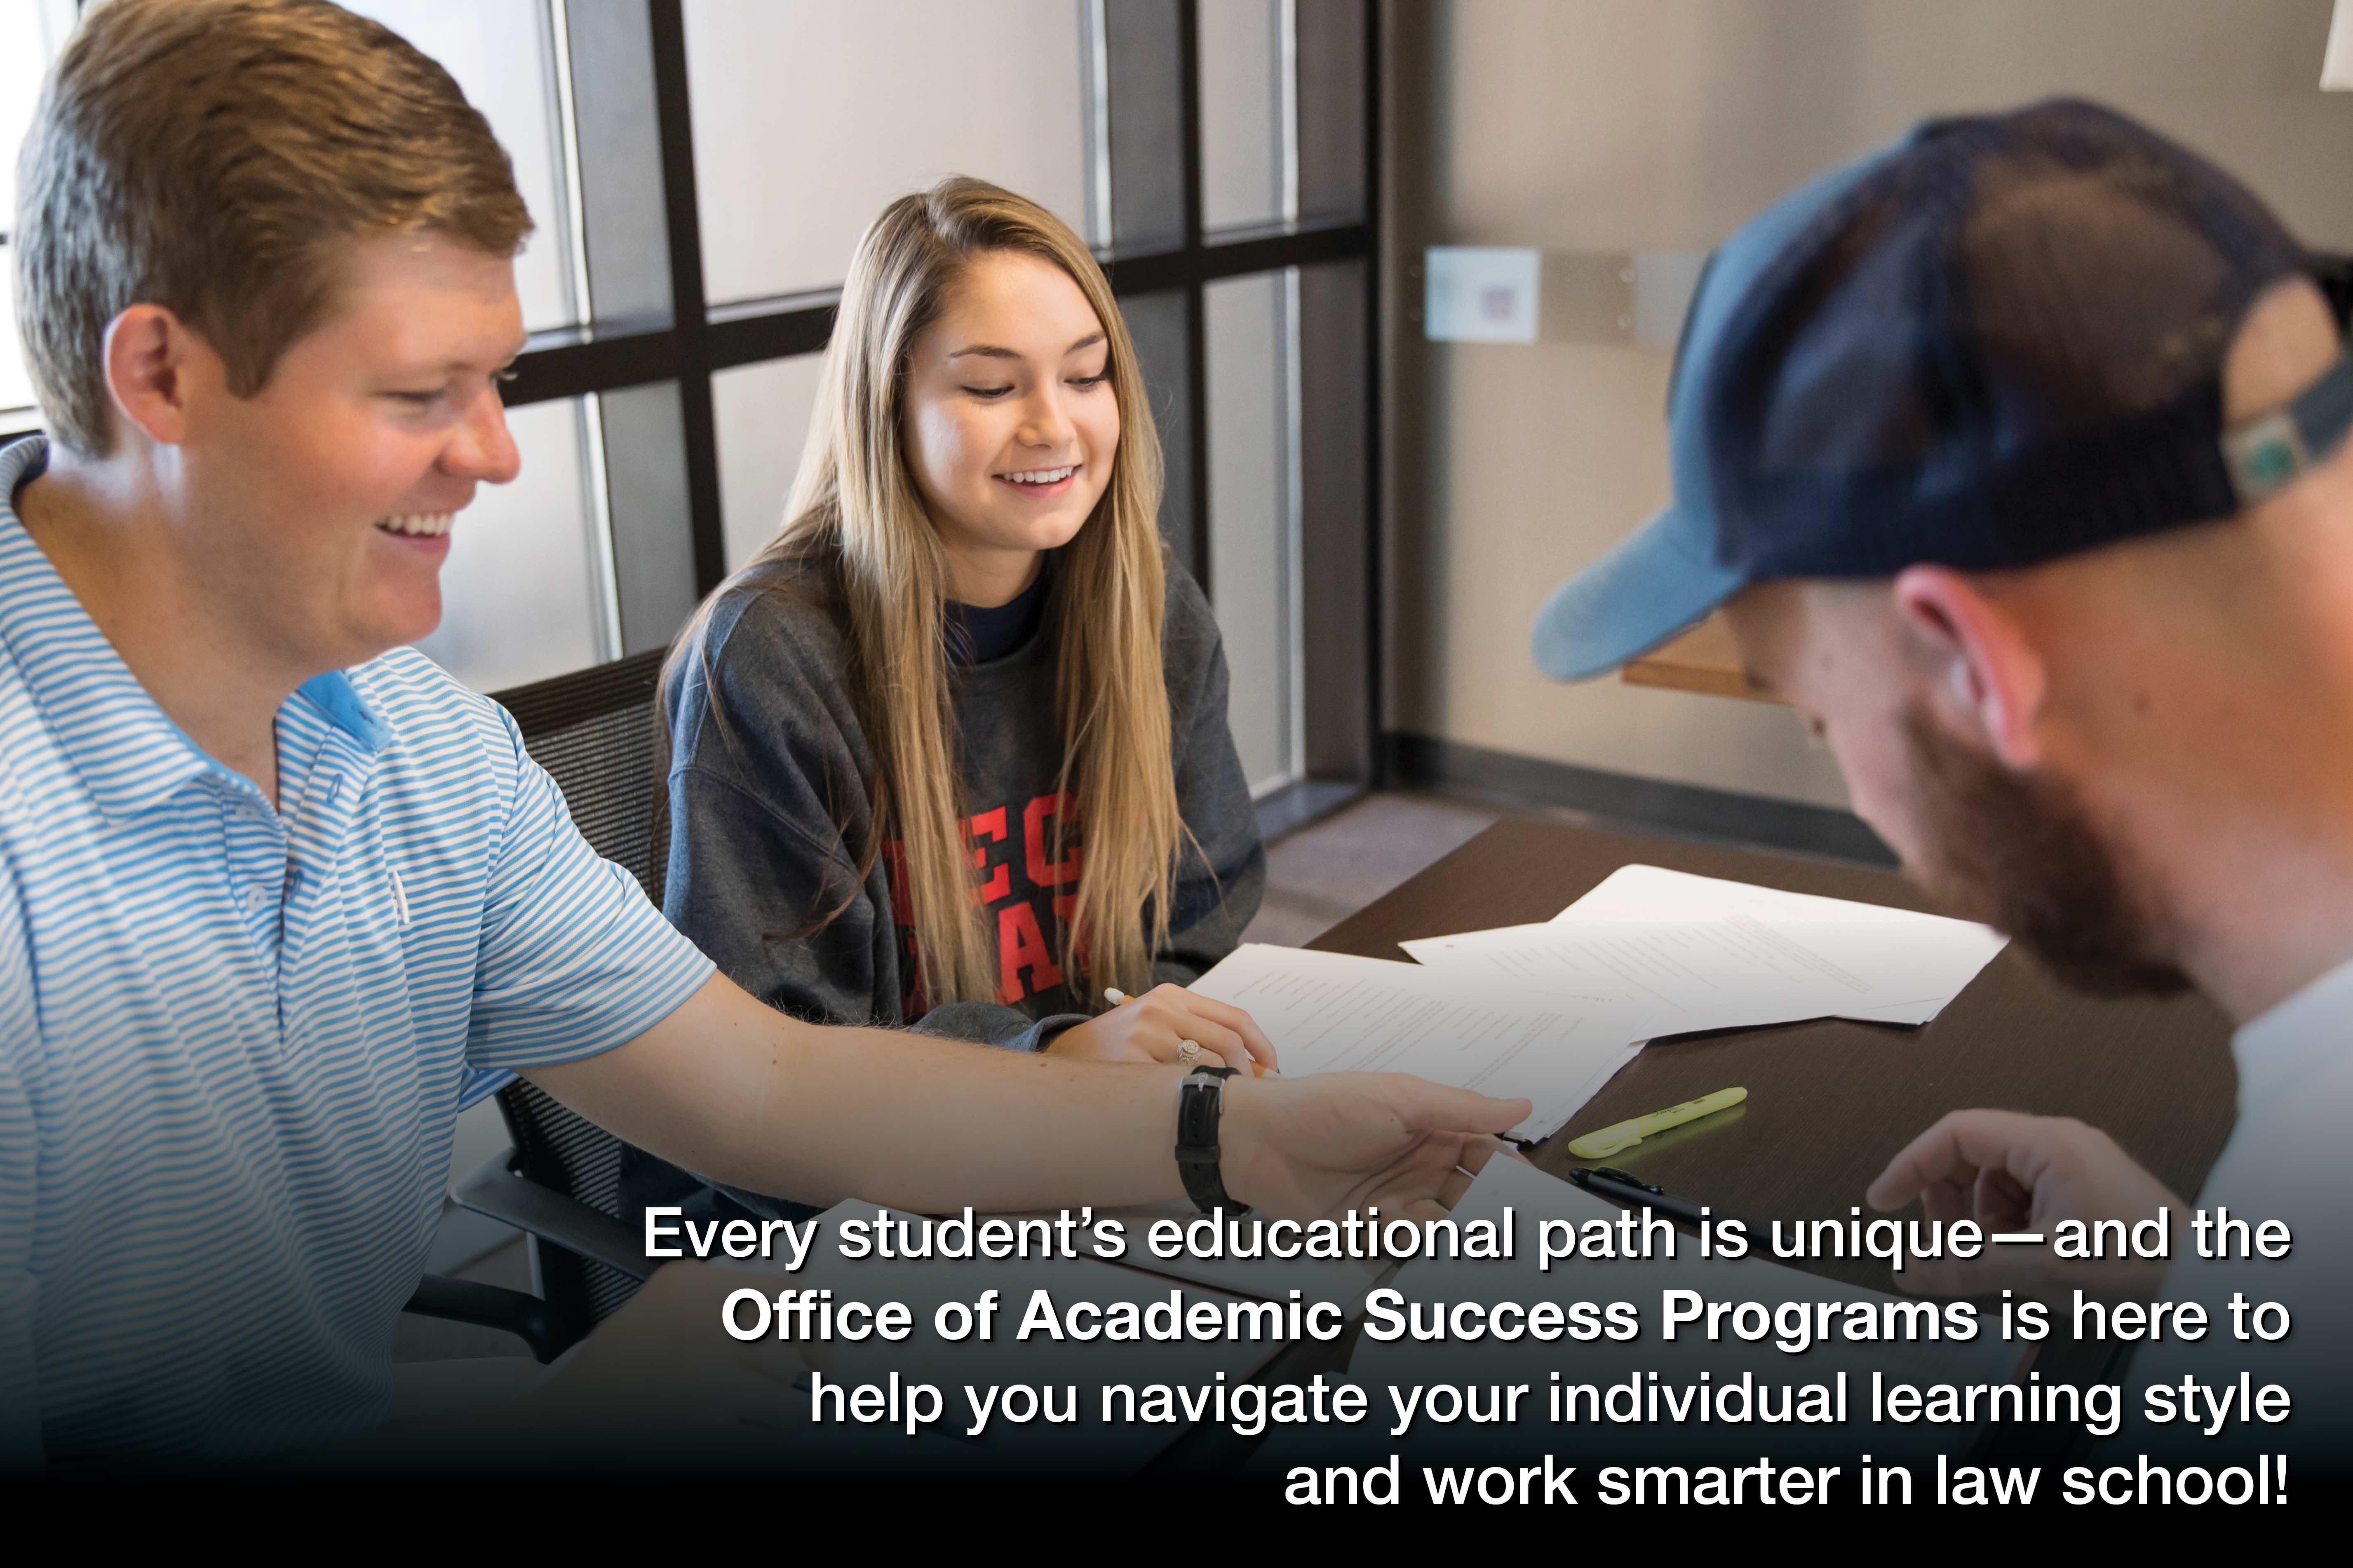 Every student’s educational path is unique—and the Office of Academic Success Programs is here to help you navigate your individual learning style and work smarter in law school!